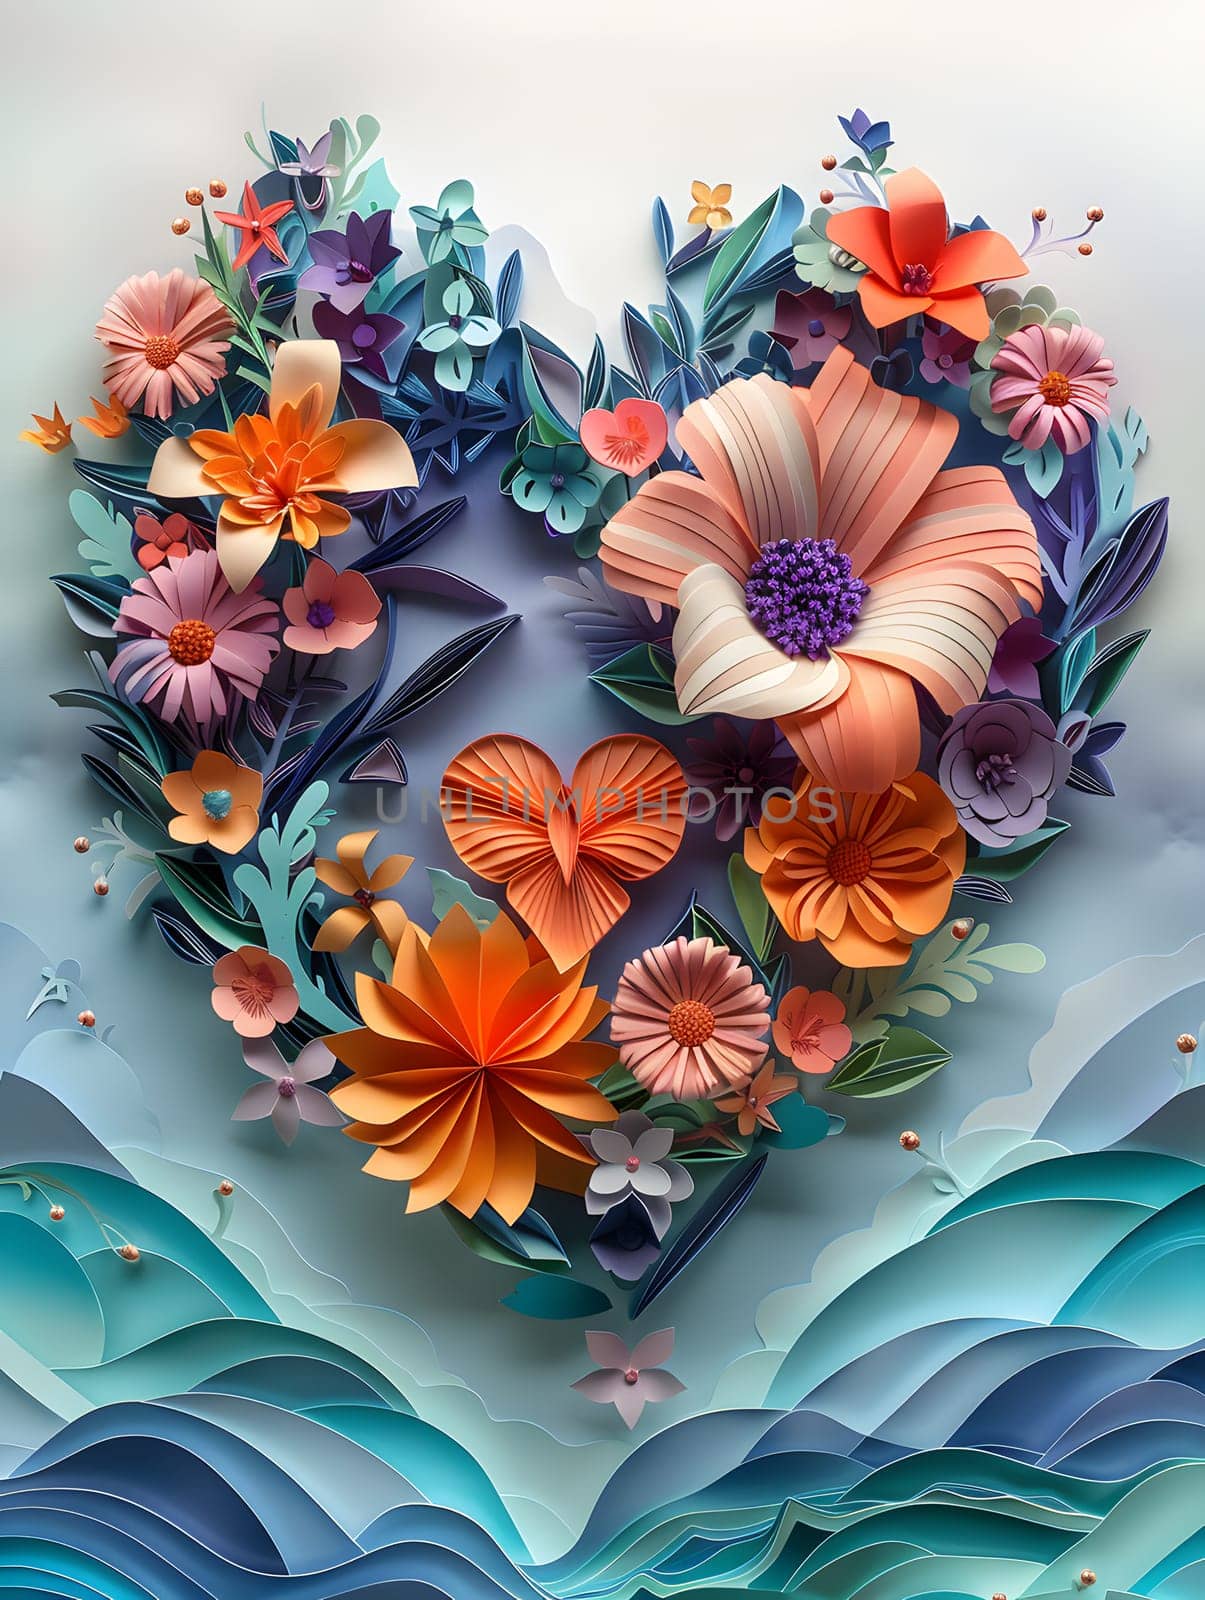 Artistic paper flower heart with mountain backdrop by Nadtochiy